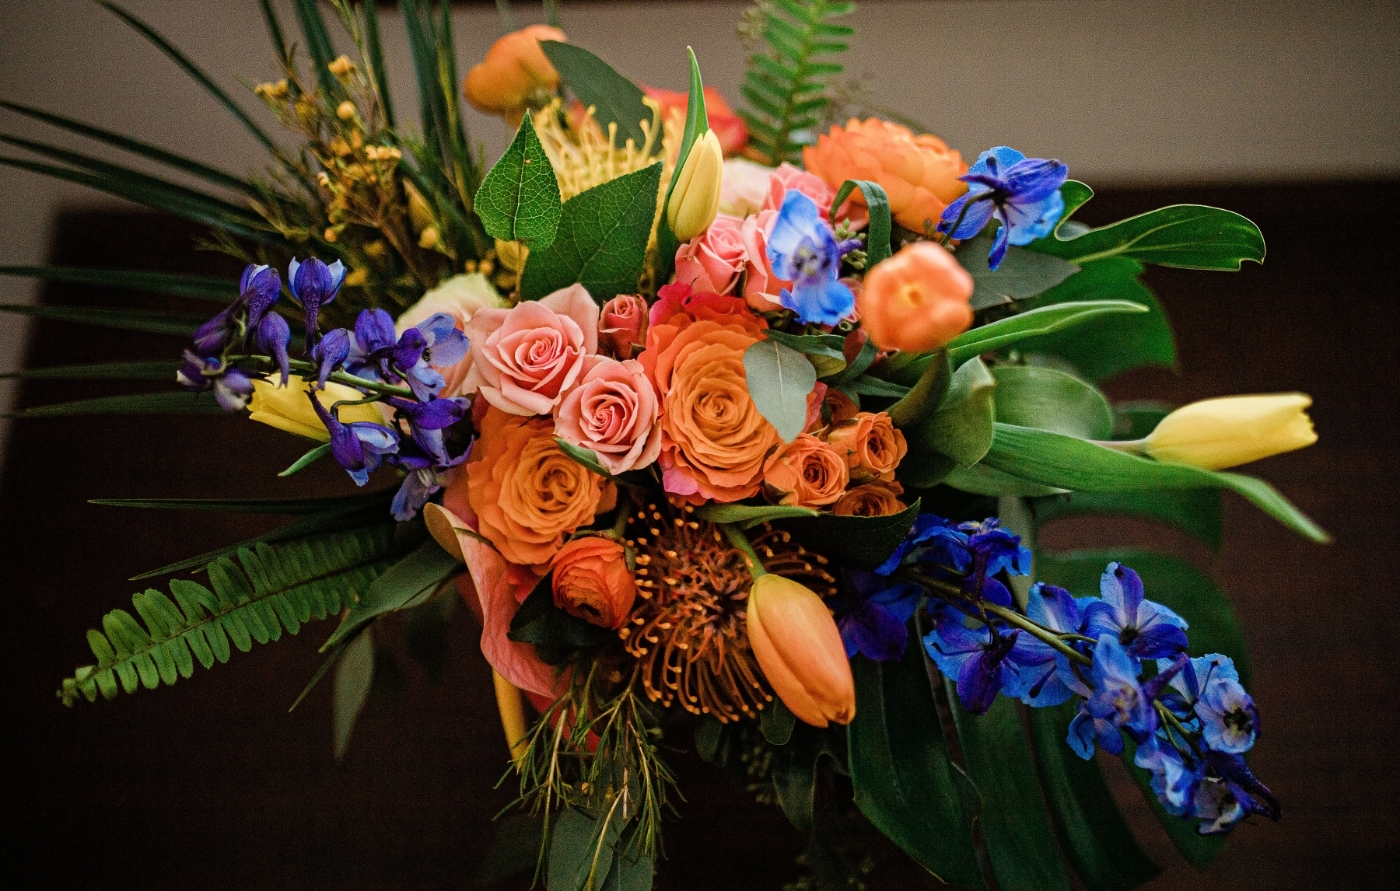 Wedding flowers by Suntree Flowers and Gifts in Melbourne, FL